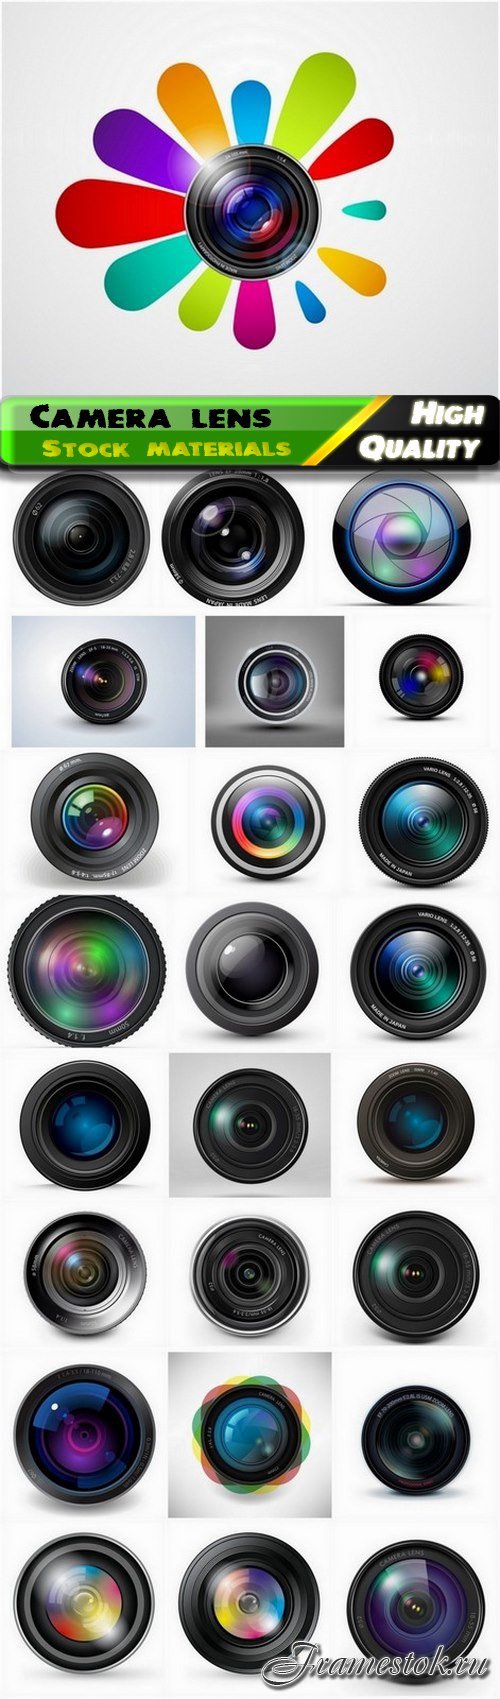 Realistic camera and camcorder glass lens - 25 Eps